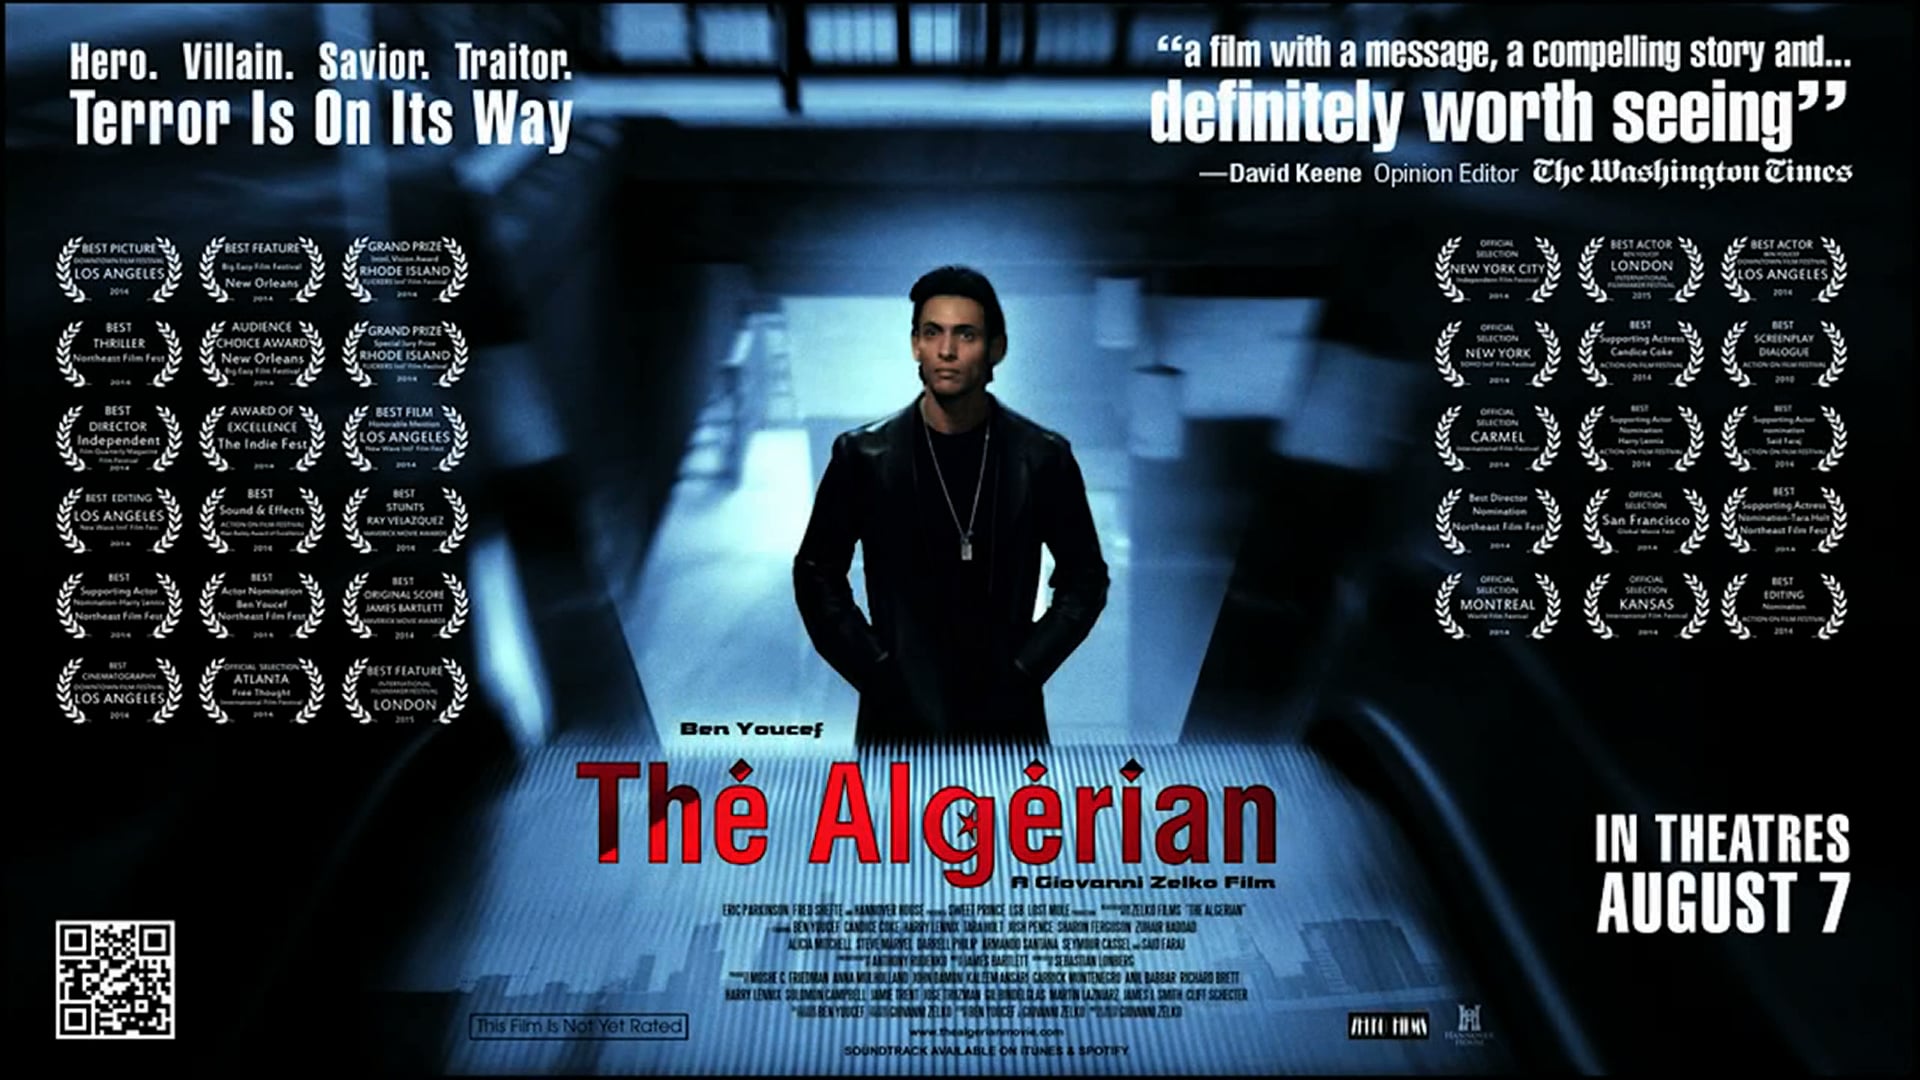 "The Algerian" Theatrical Release